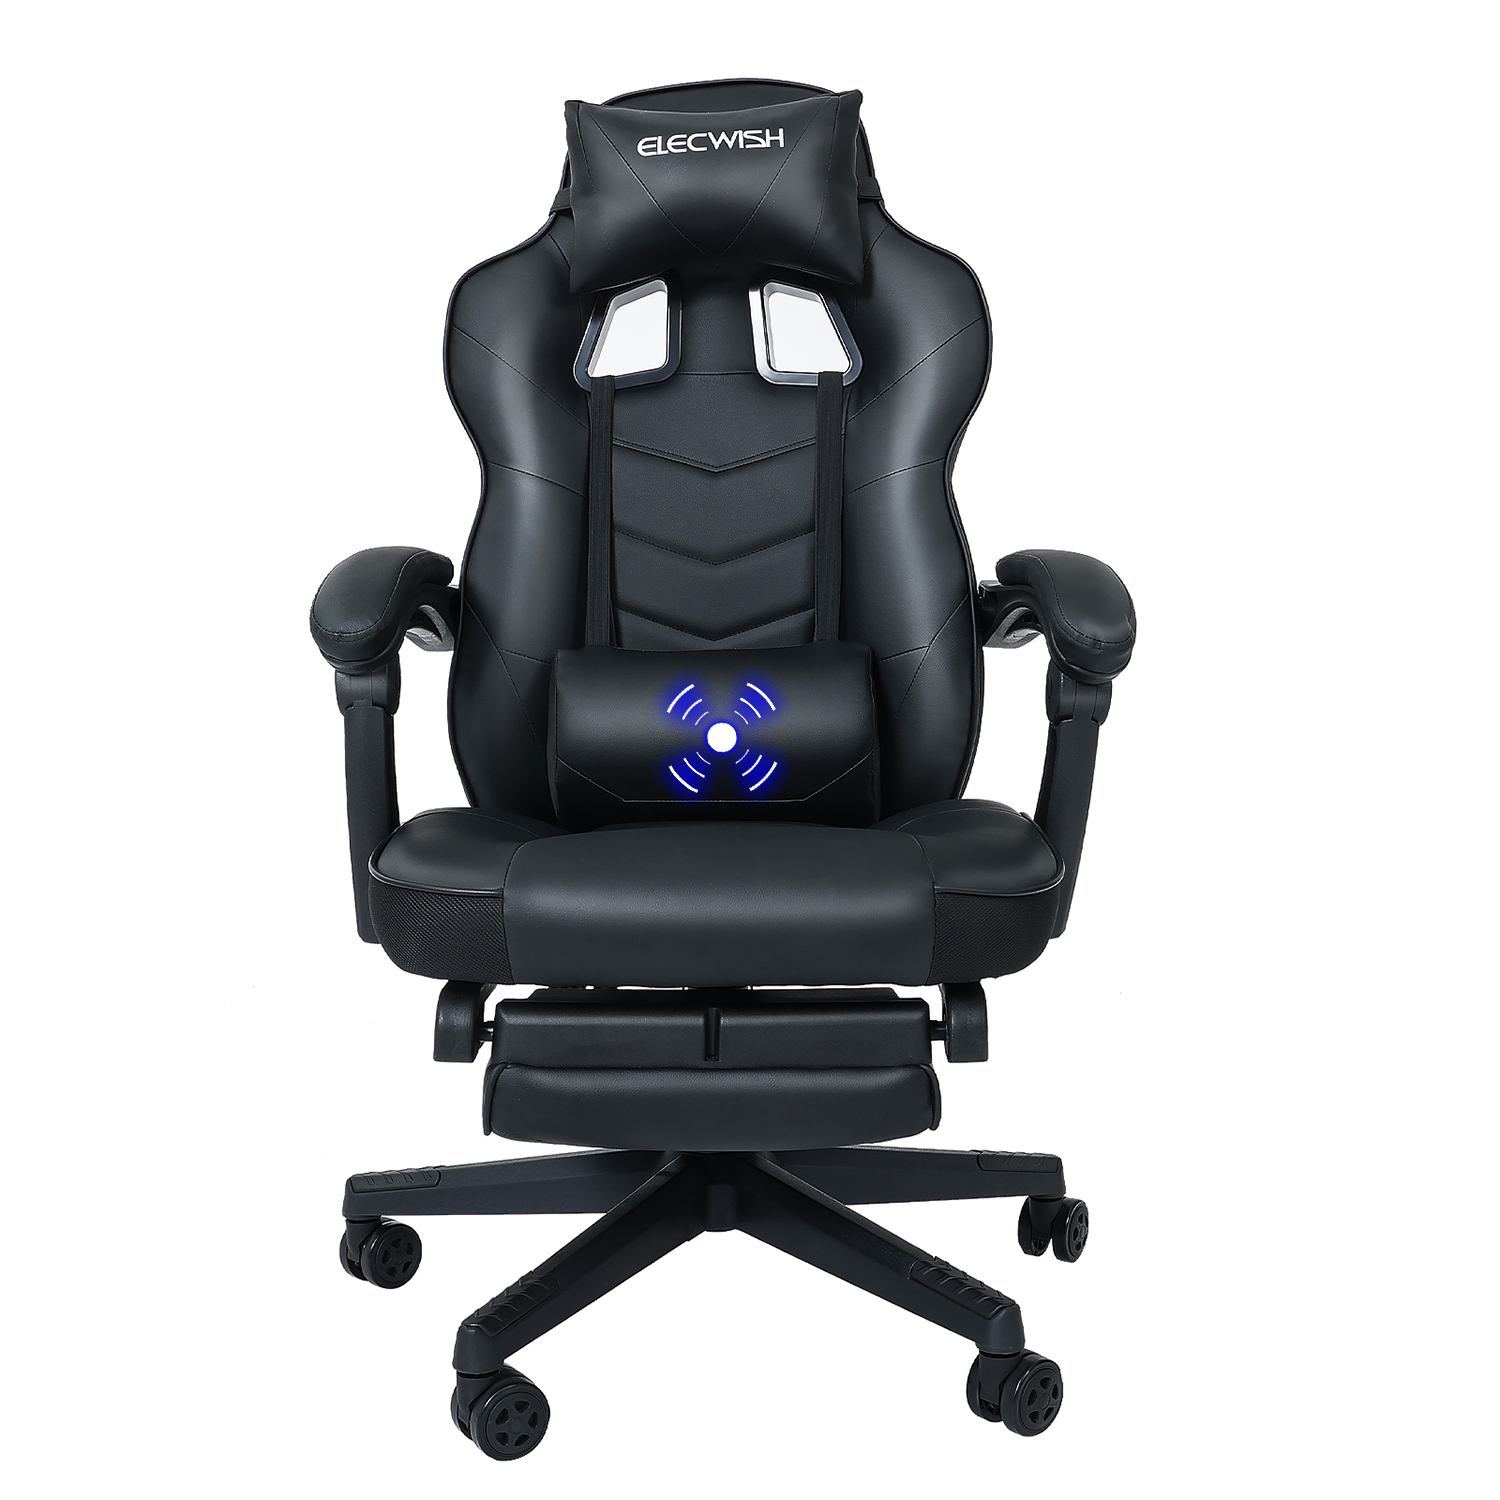 OC-087 Video Gaming Chair Massage for Adults with Footrest Computer Desk Chair PU Leather 150° Reclining High Back Support Office chair for Home with Headrest Lumbar Pillow